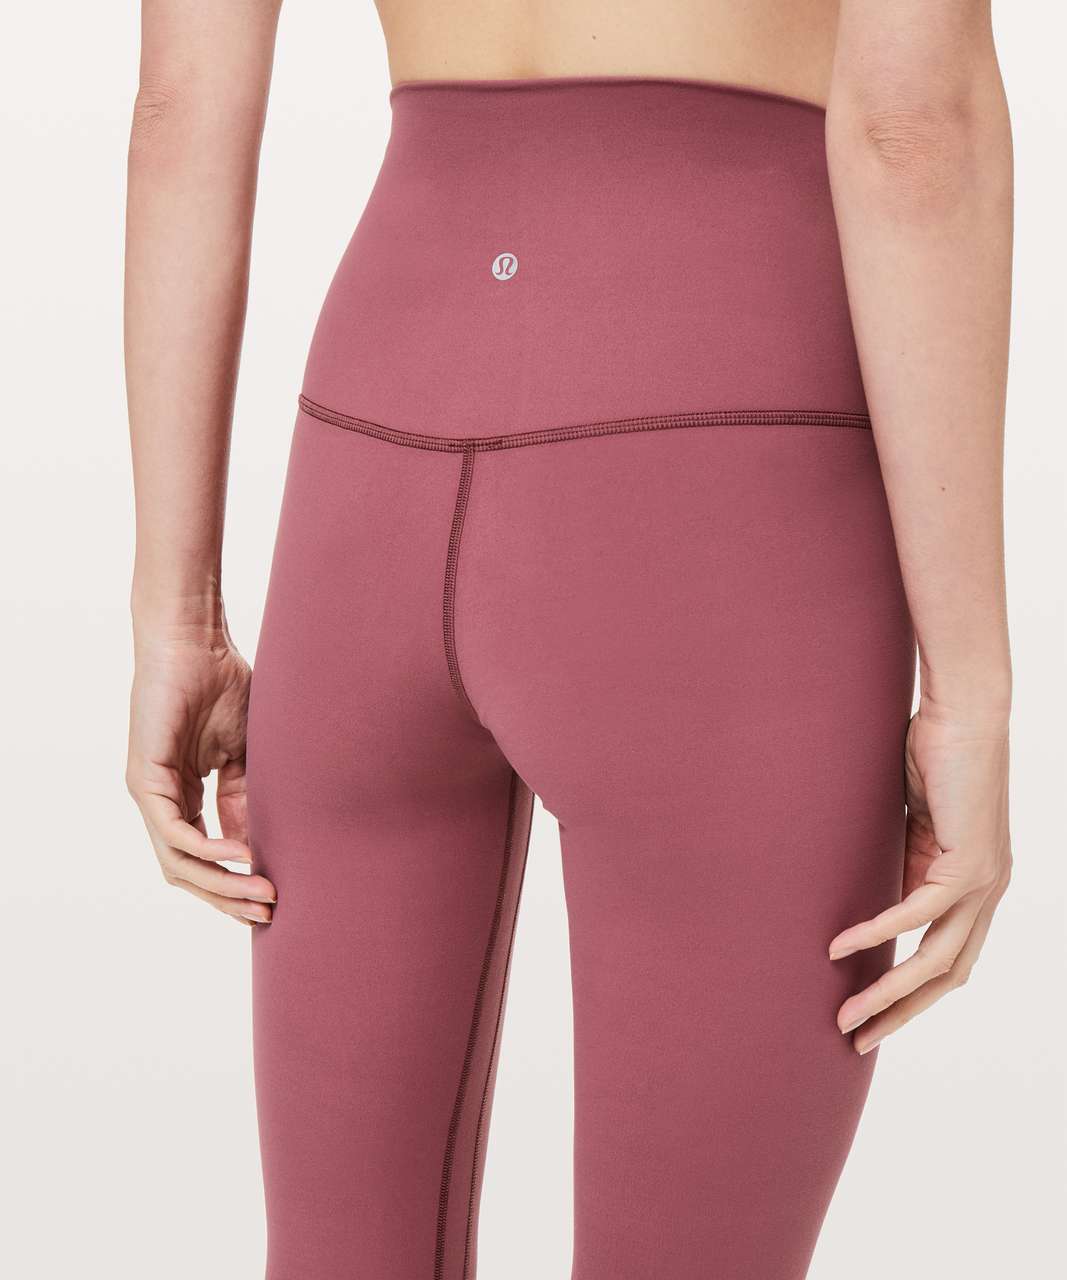 Lululemon Align High Rise Pant with Pockets 25 - Red Merlot